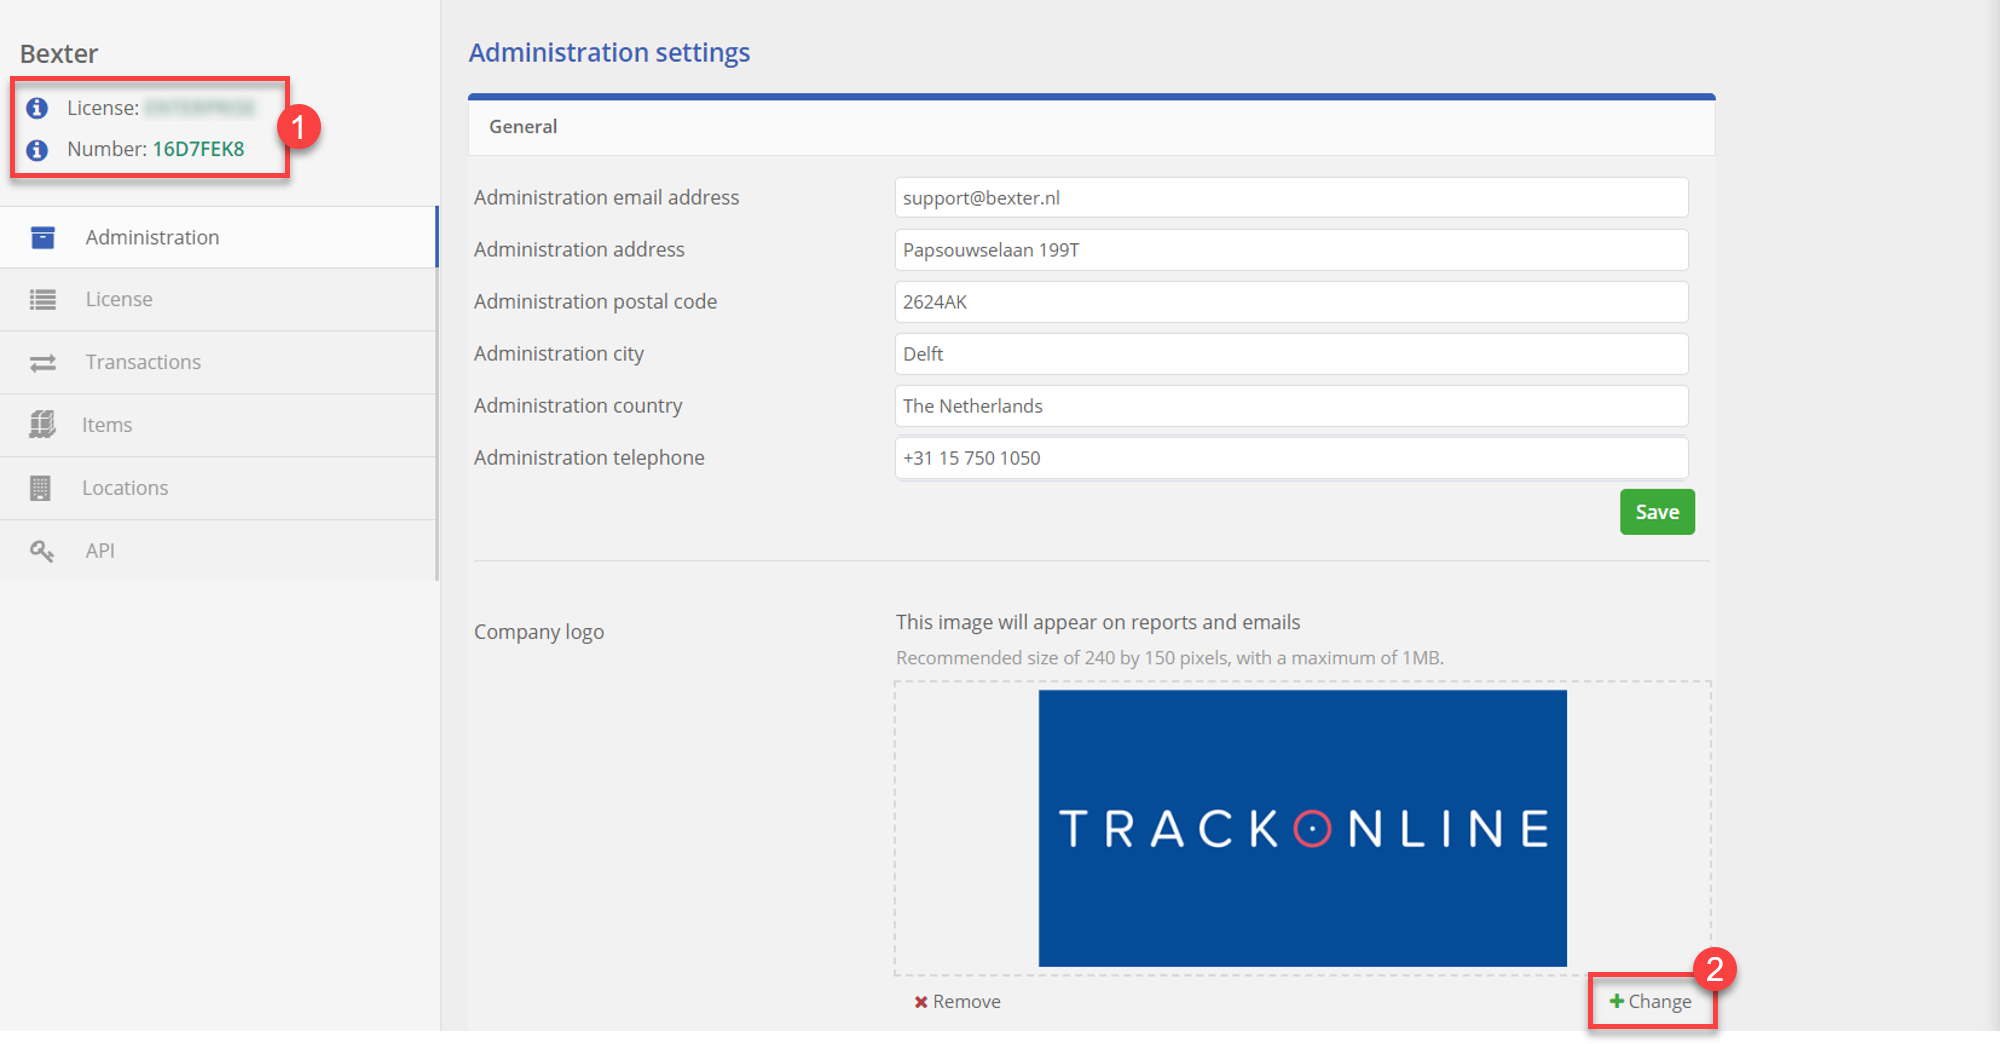 Administration settings details